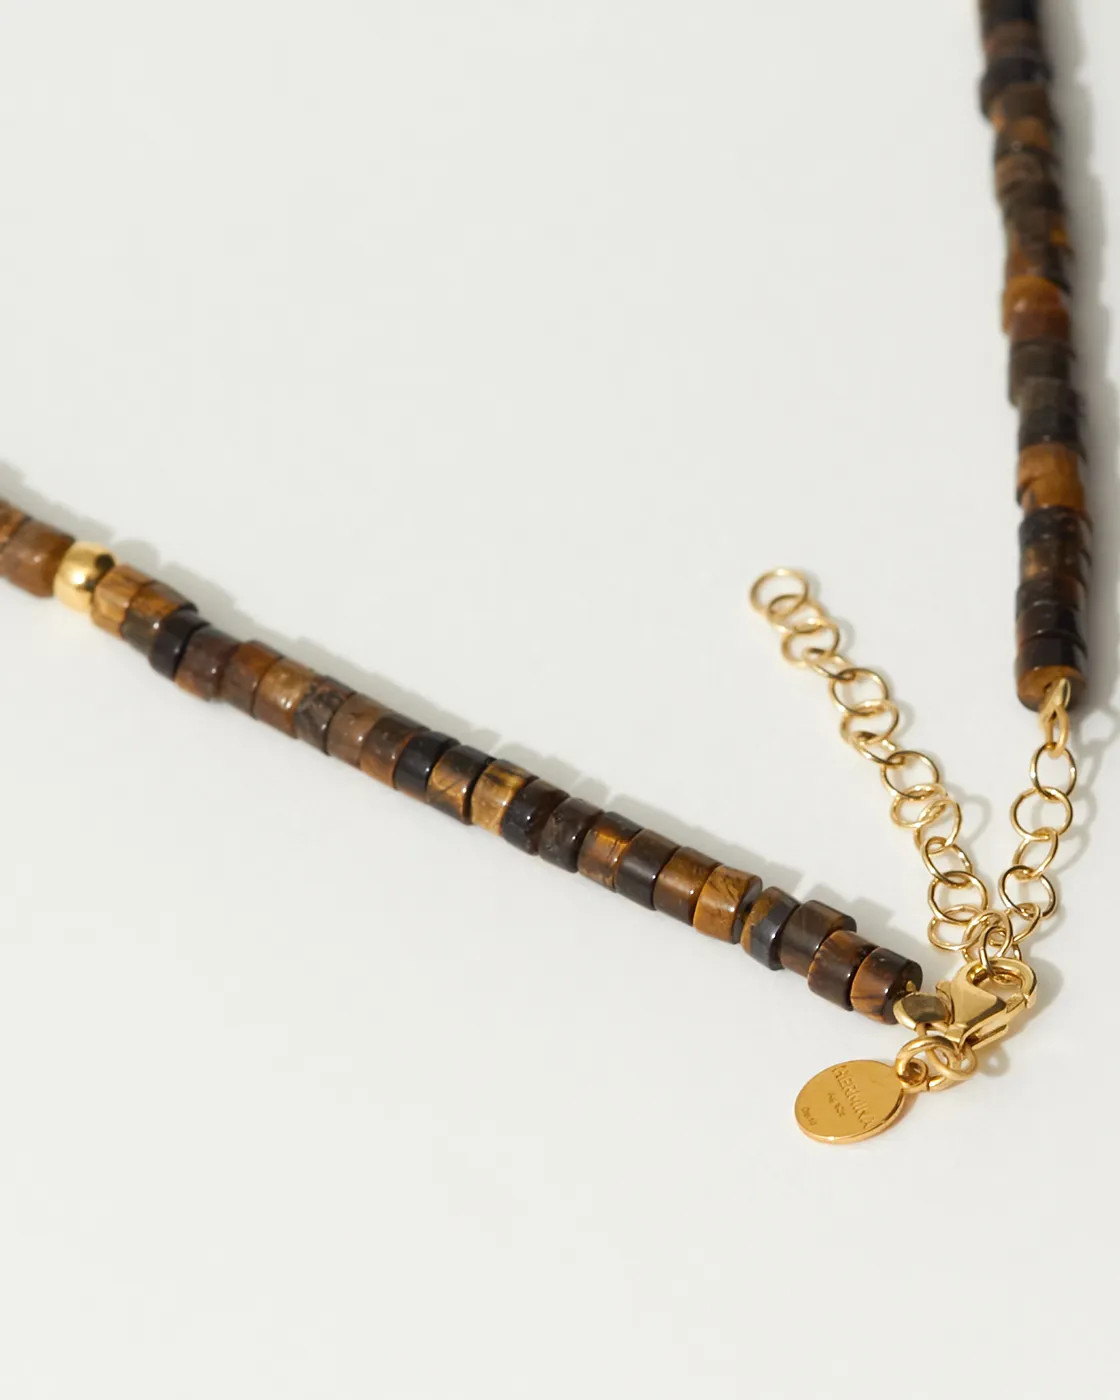 The Last Crusade Tiger’s eye Necklace